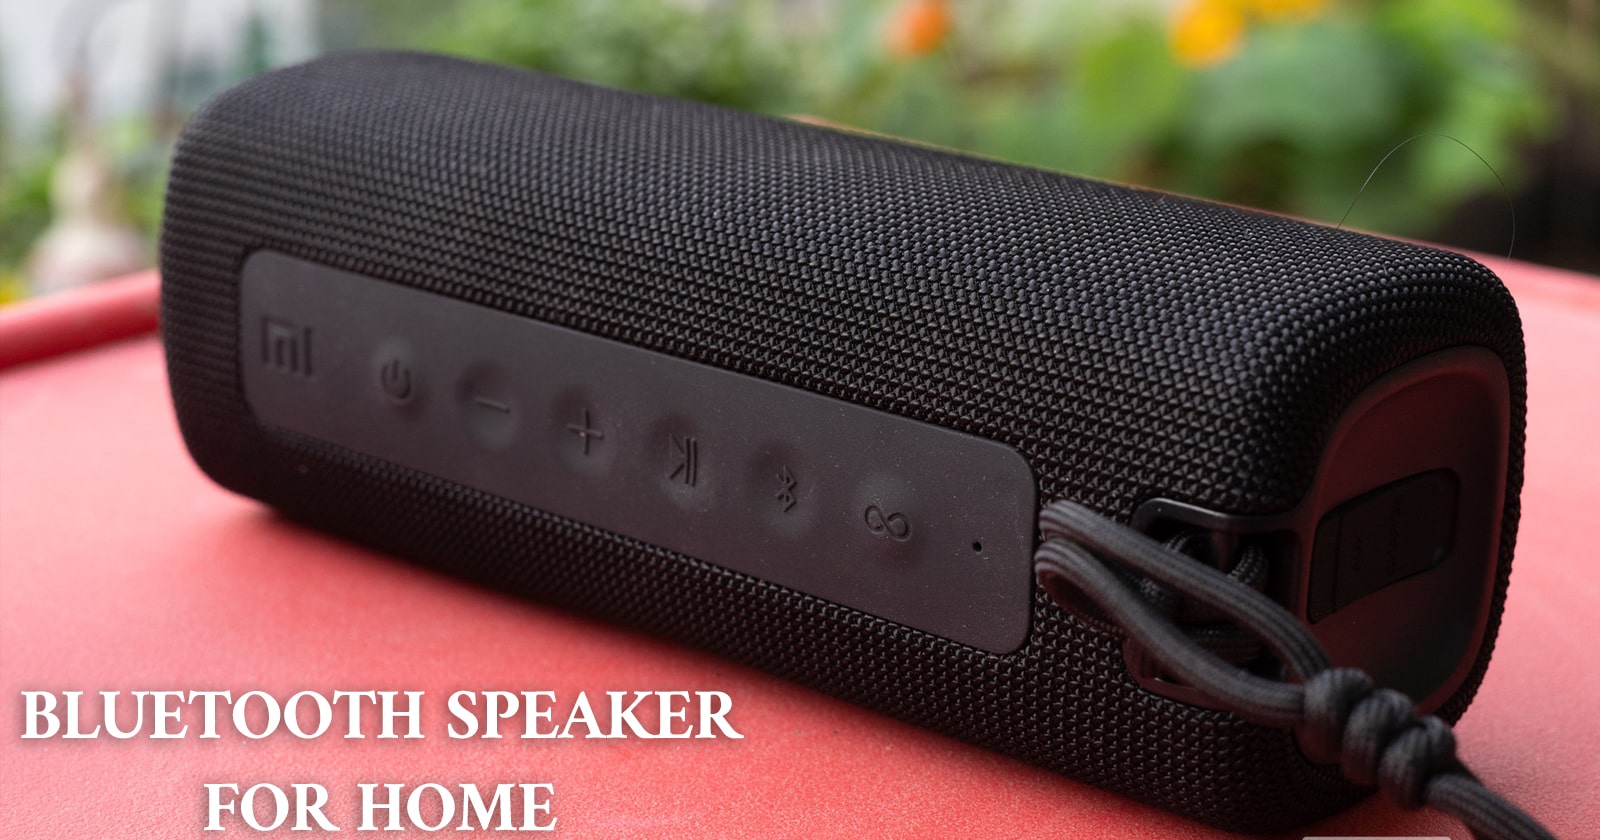 Best sound quality Bluetooth speaker for home?